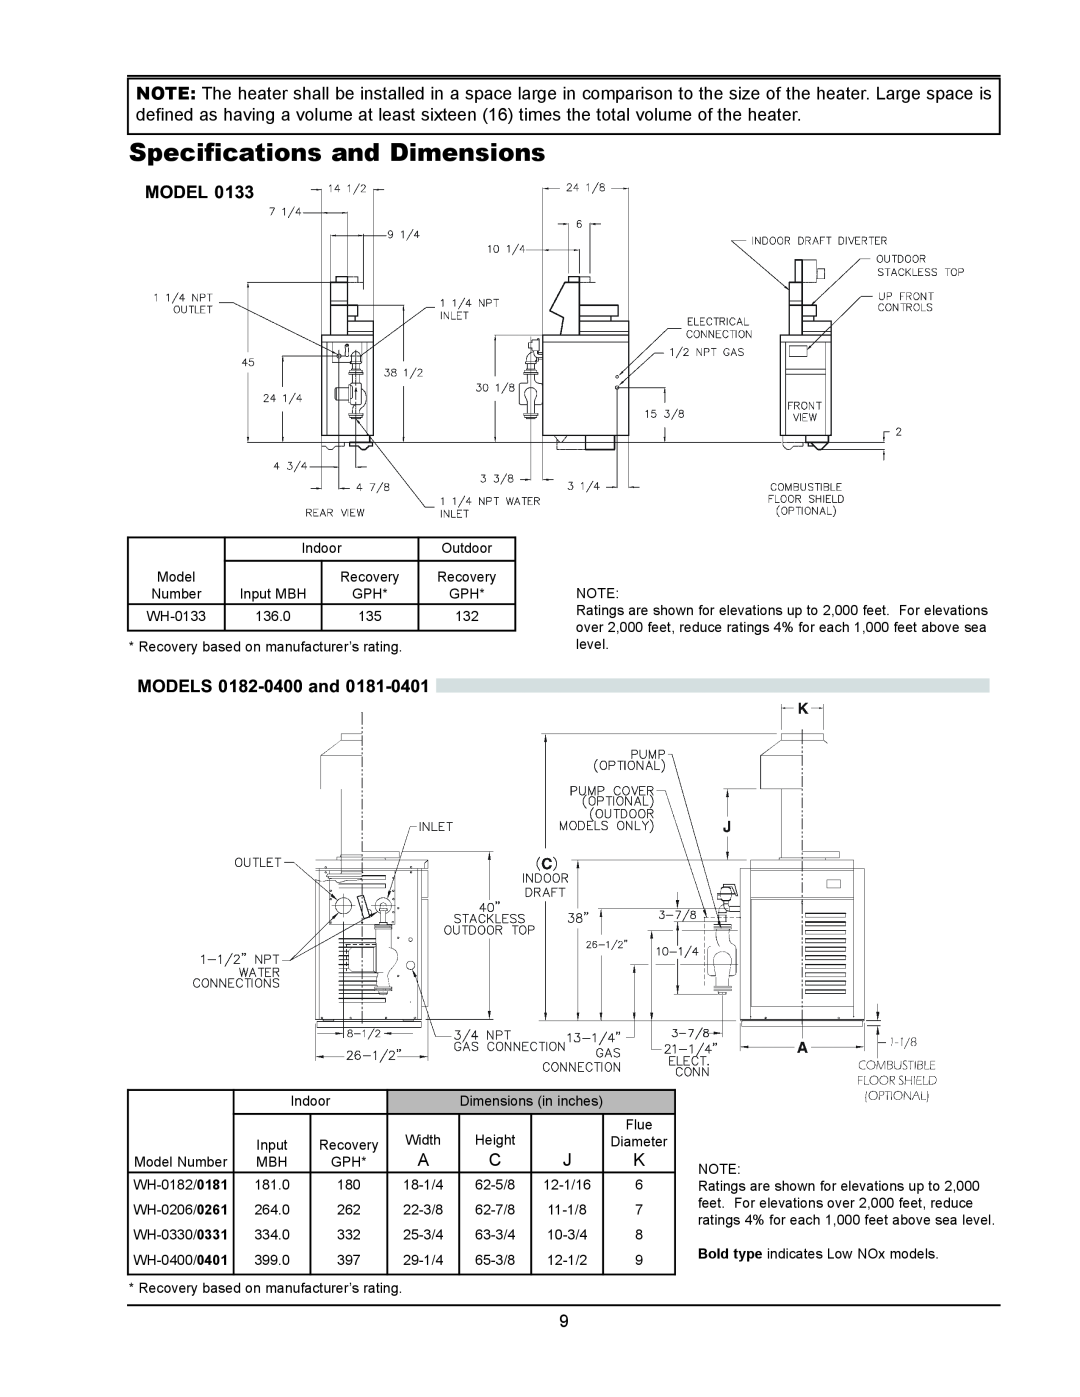 Raypak 1334001 operating instructions Specifications and Dimensions, Model, MODELS 0182-0400and 